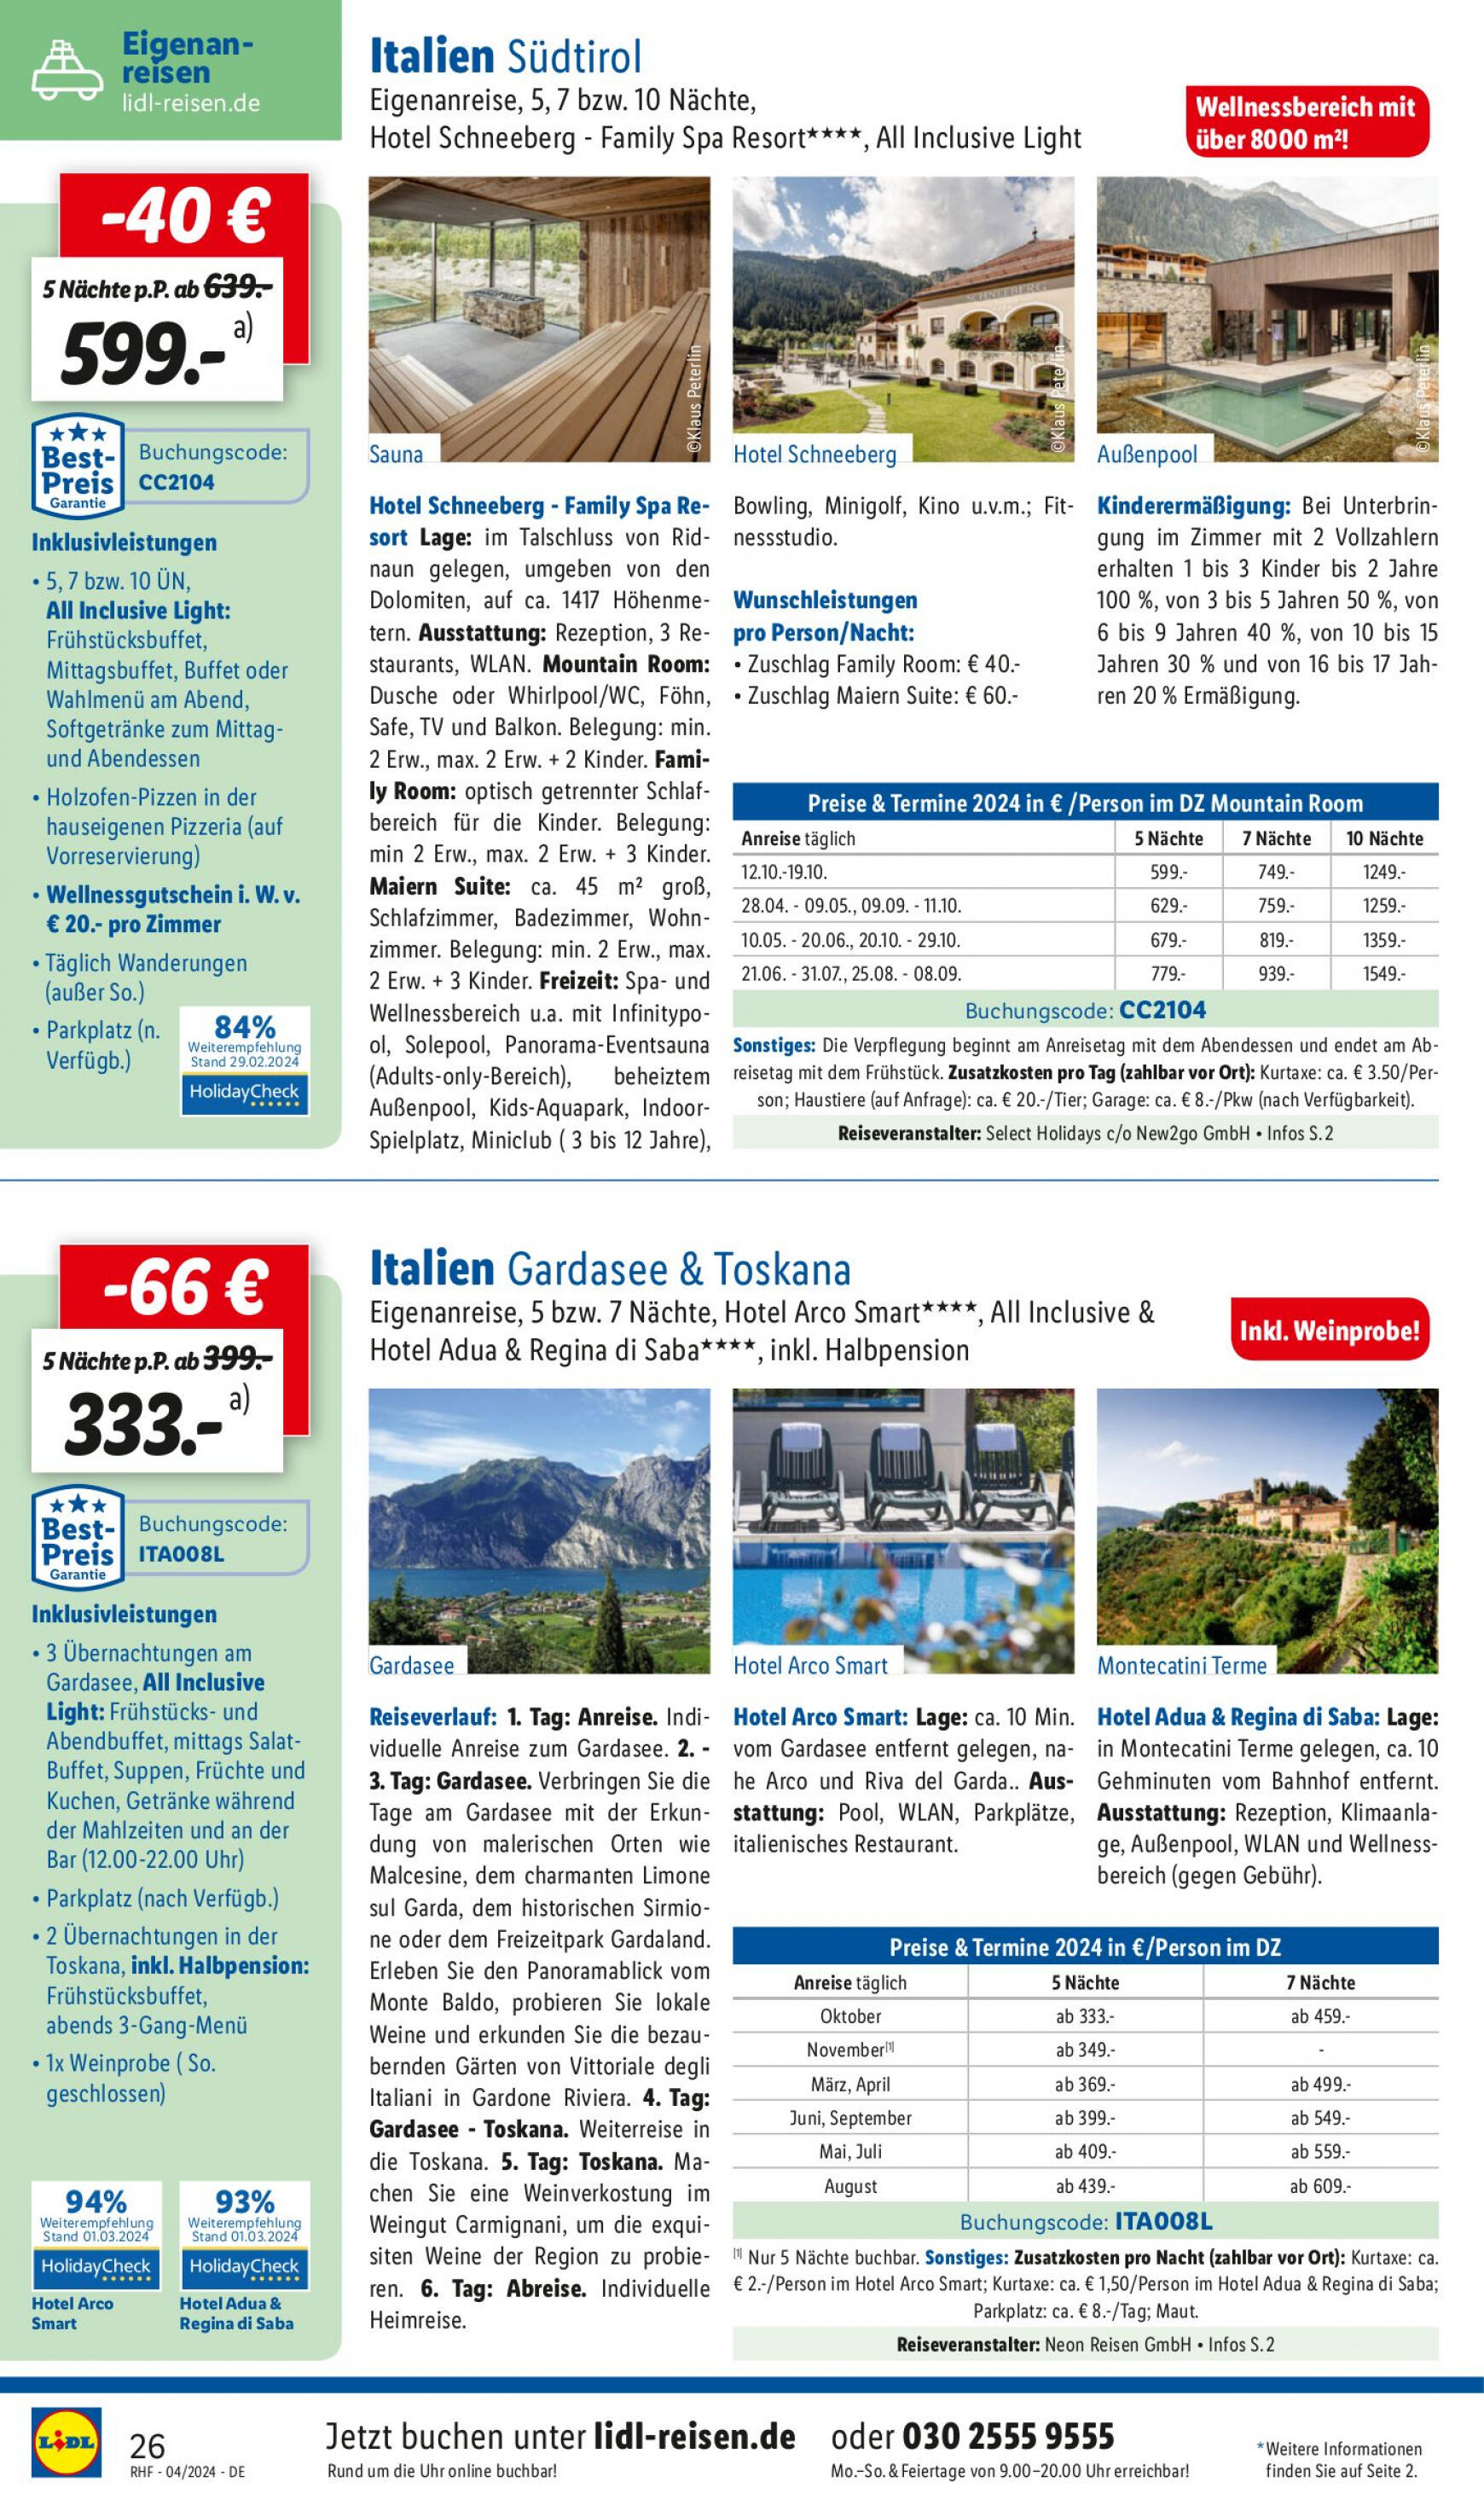 lidl - Flyer Lidl - April Reise-Highlights aktuell 27.03. - 30.04. - page: 26